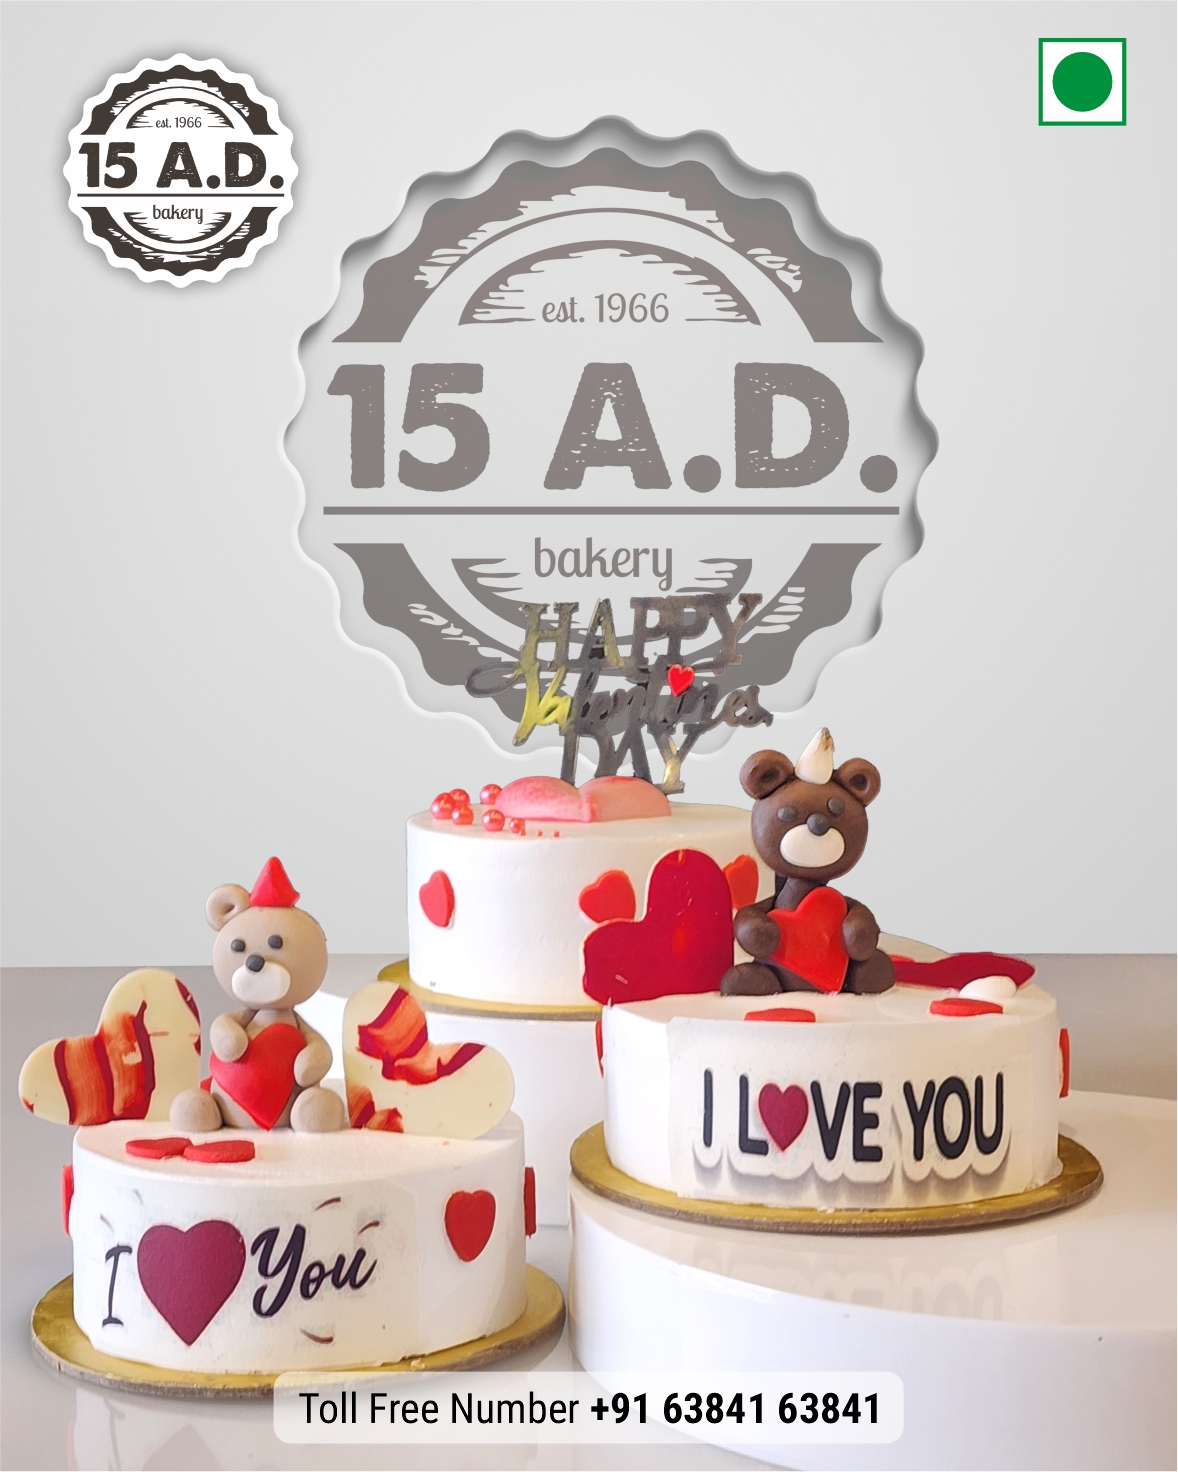 Love Cake by 15 AD Bakery